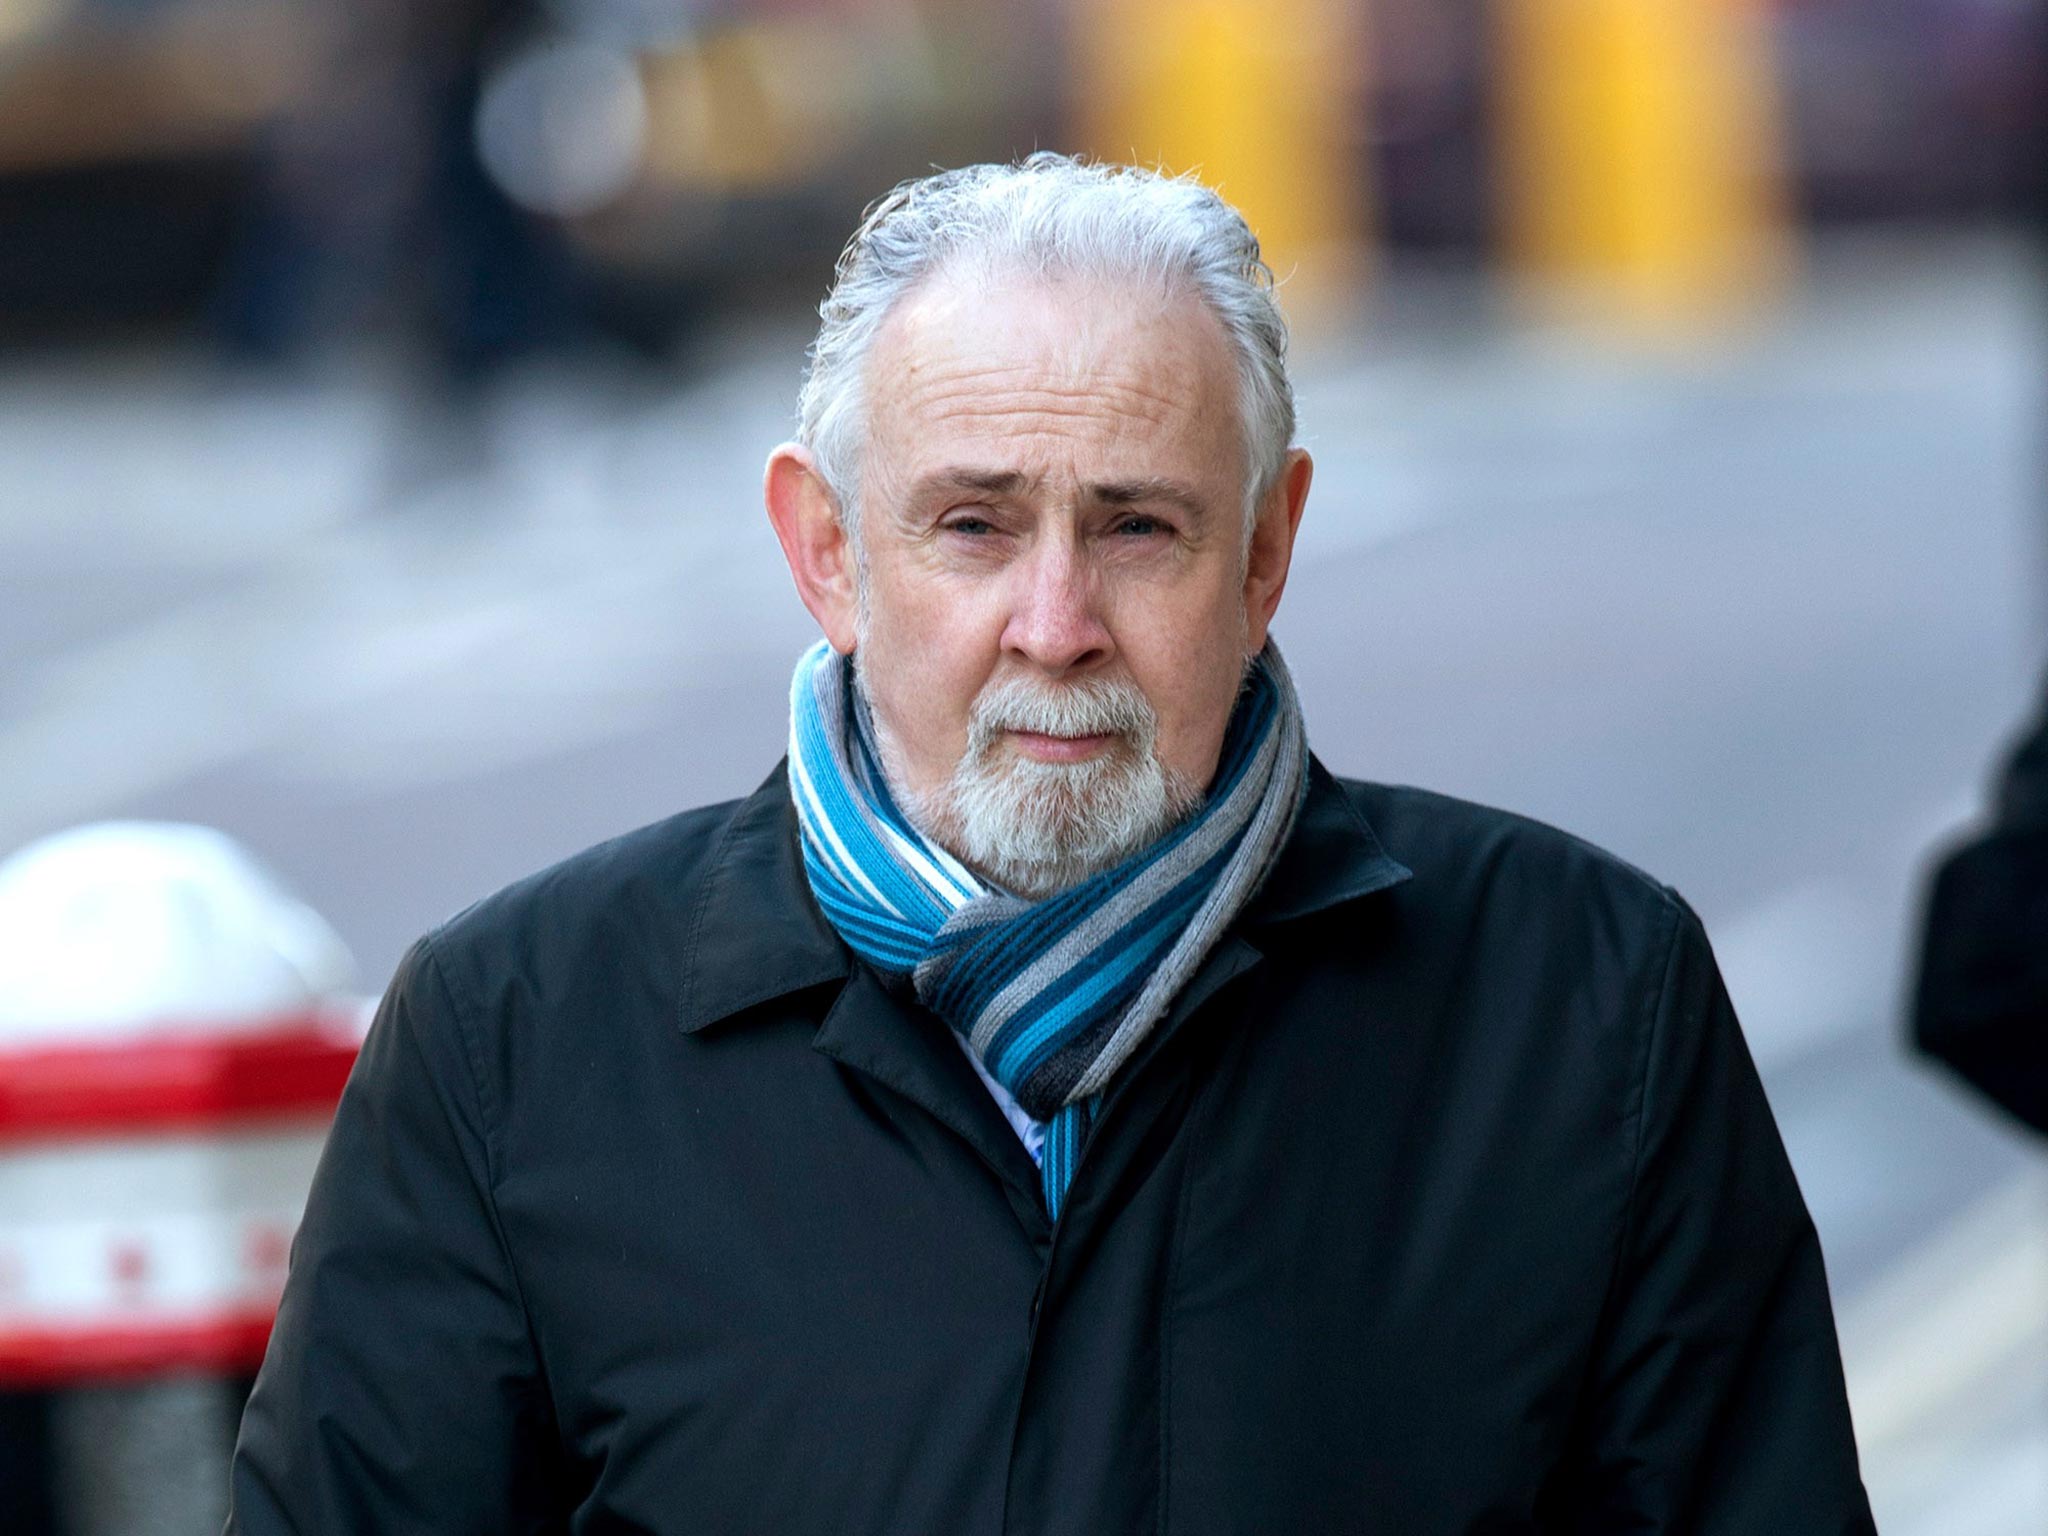 Alleged IRA Hyde Park Bomber, John Downey will not be prosecuted after he was sent a secret letter giving him a 'no trial' guarantee